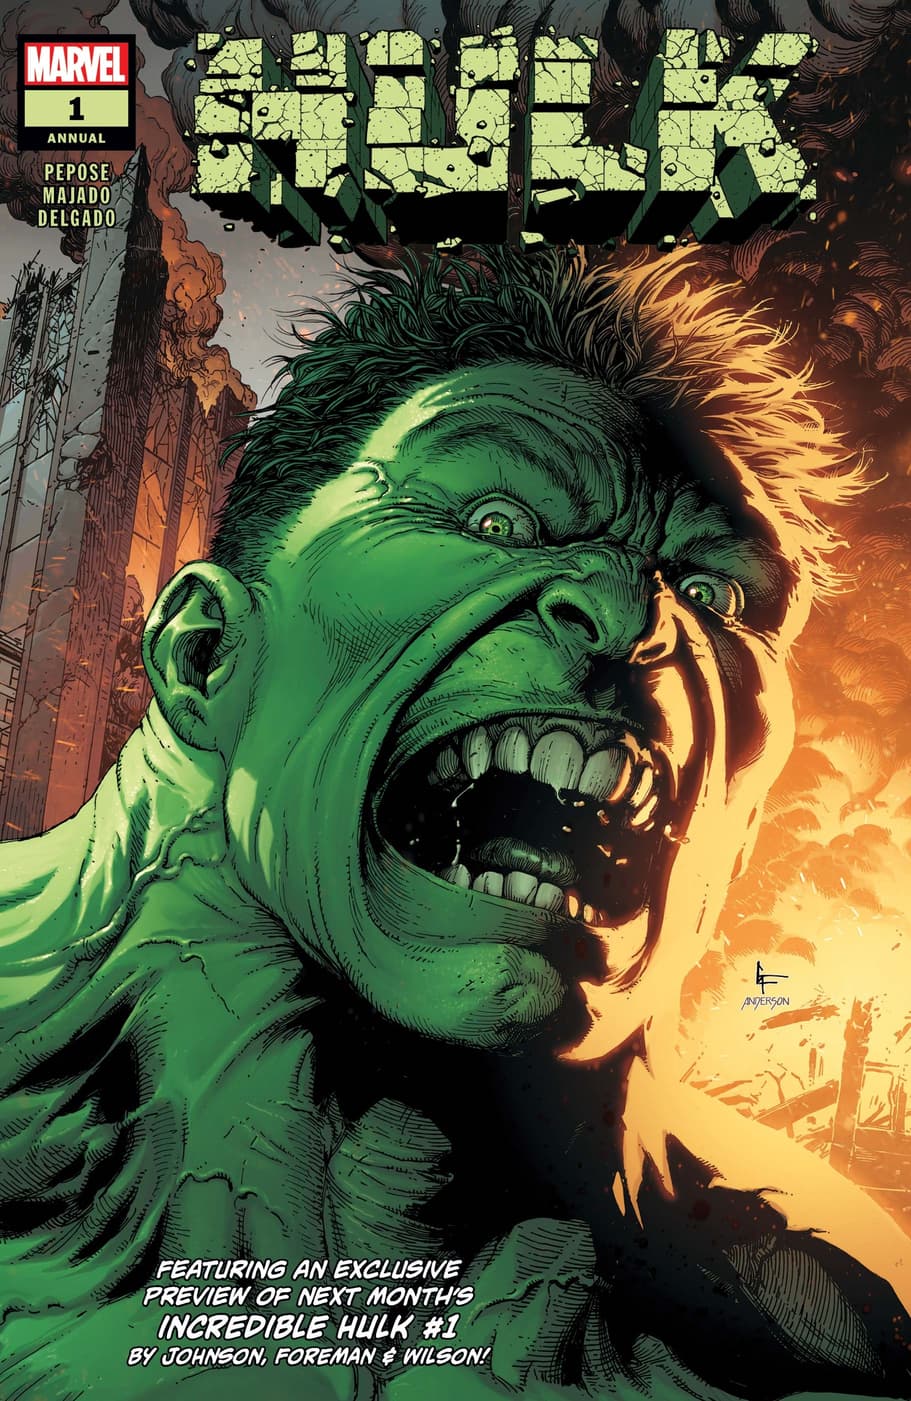 Cover to HULK ANNUAL (2023) #1 by Gary Frank and Brad Anderson.